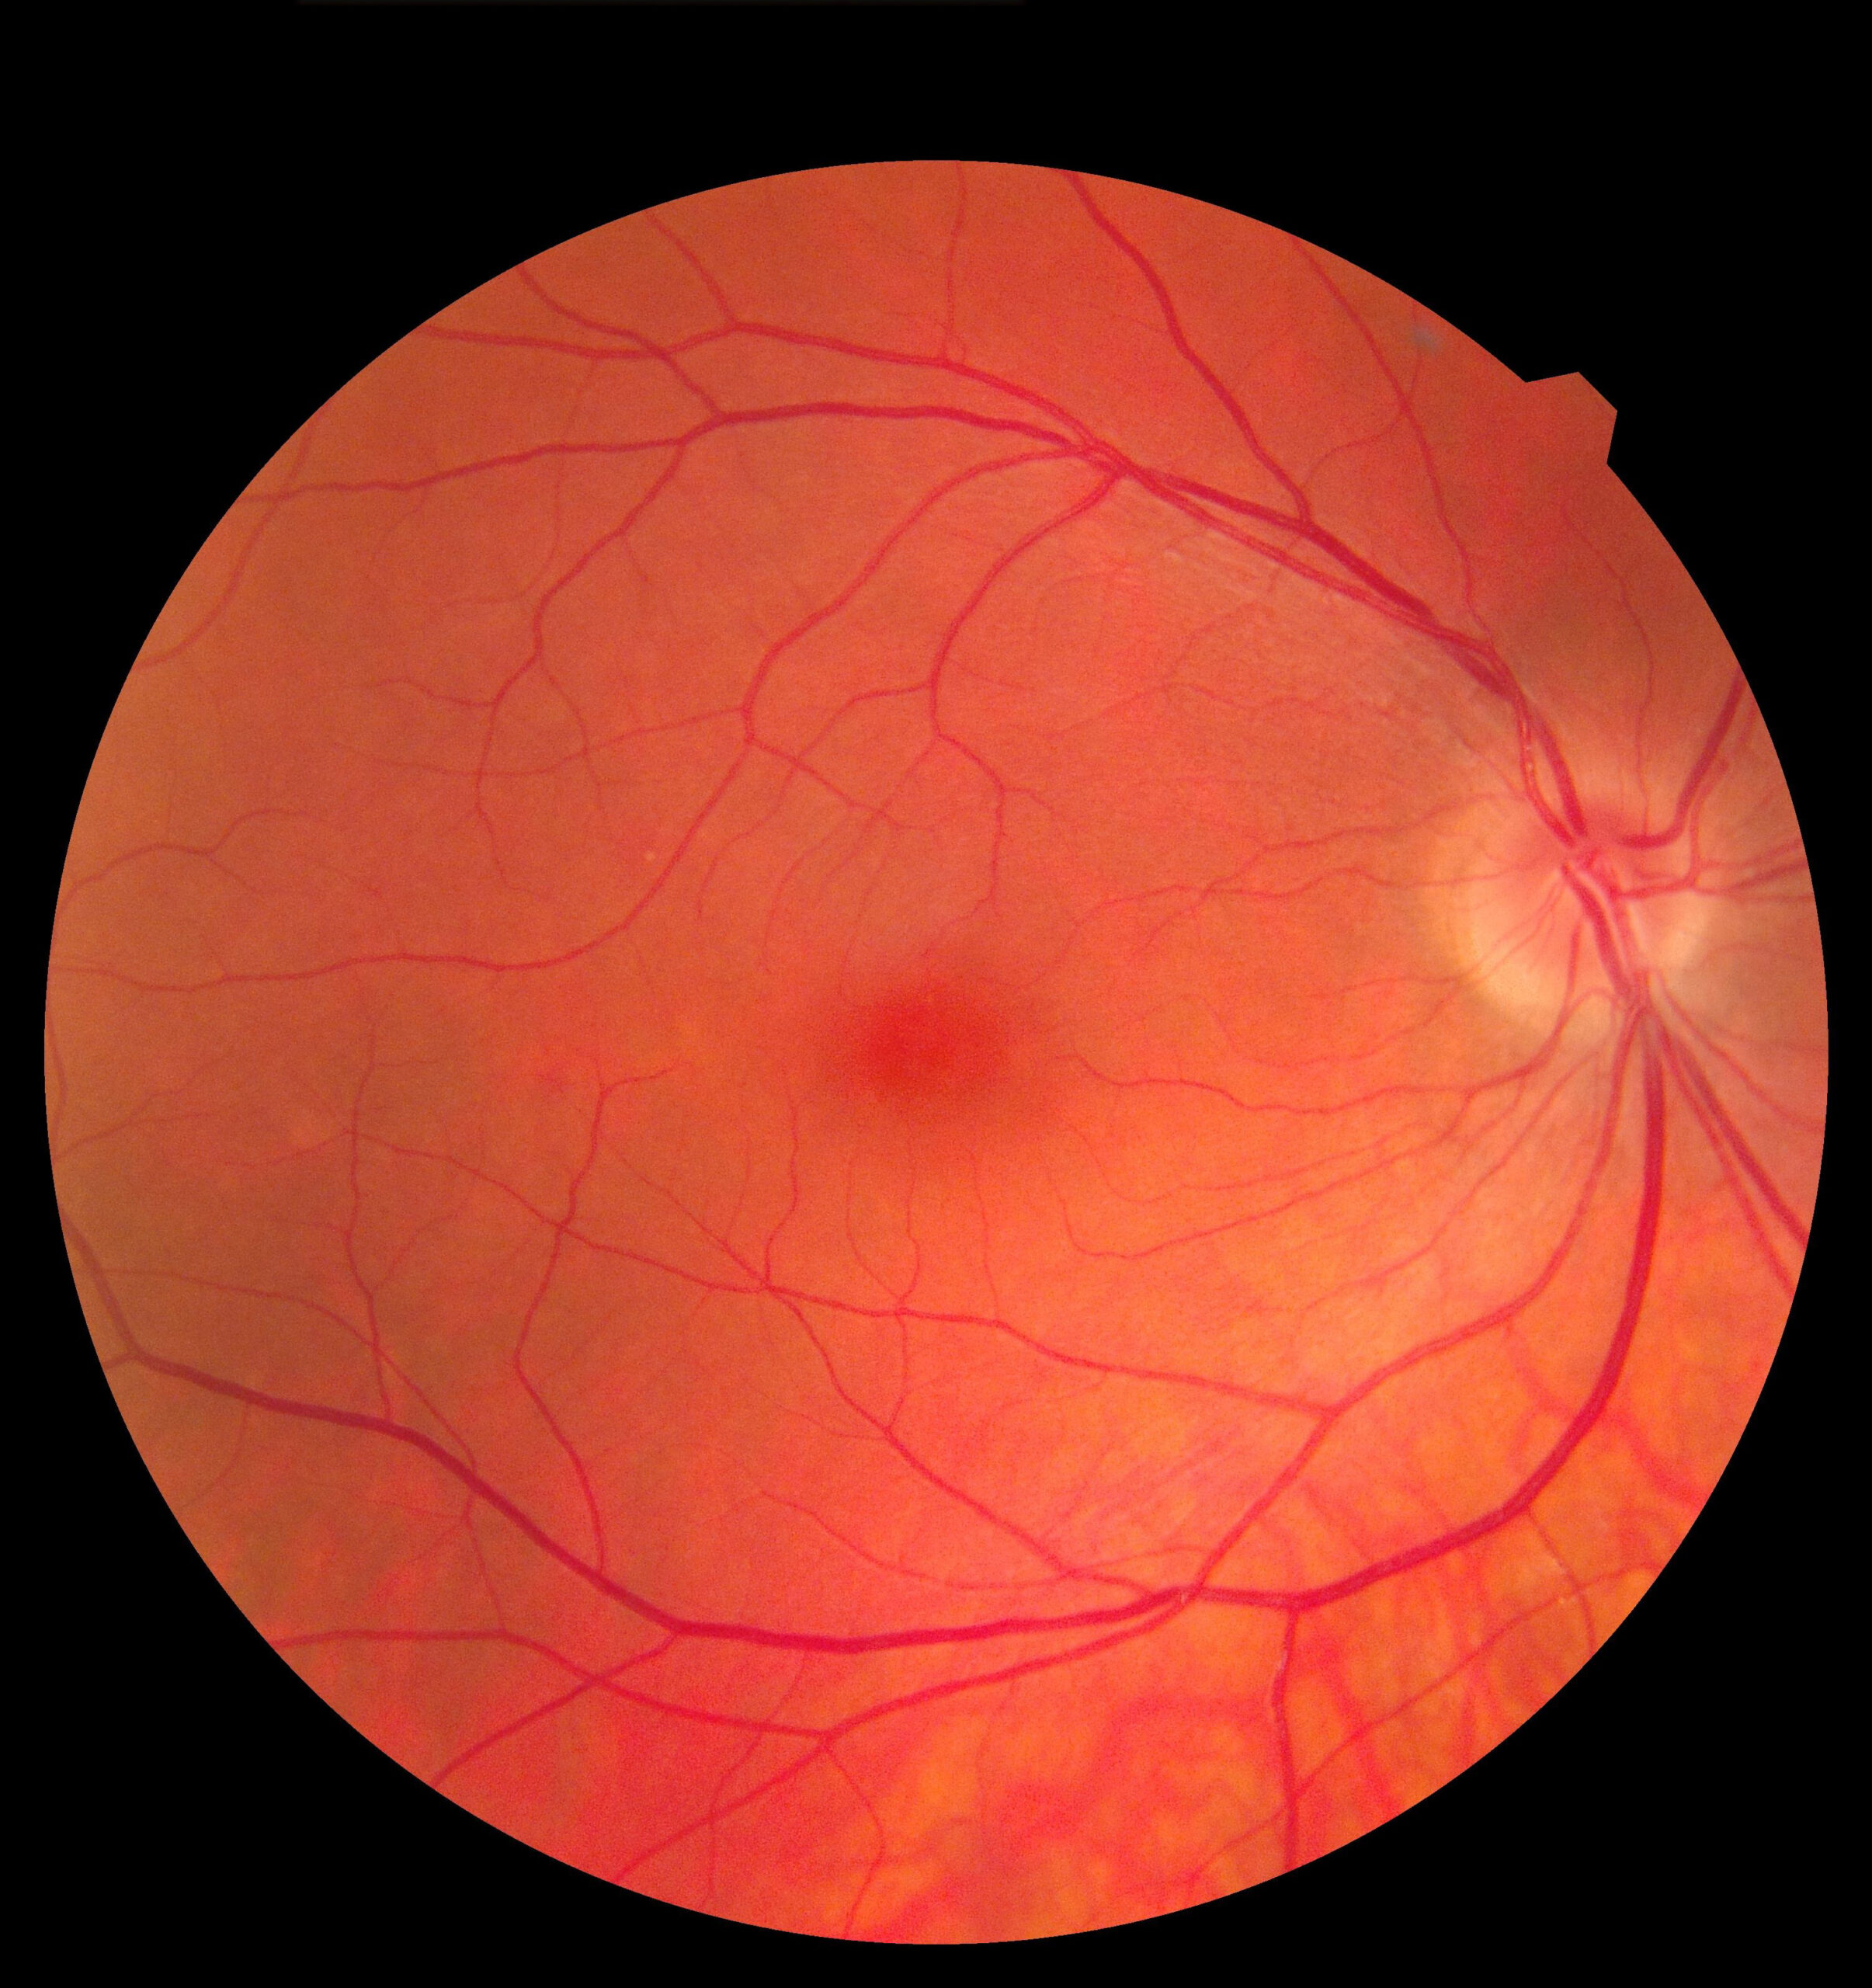 Age-Related Macular Degeneration and COVID-19: How Are They Related?